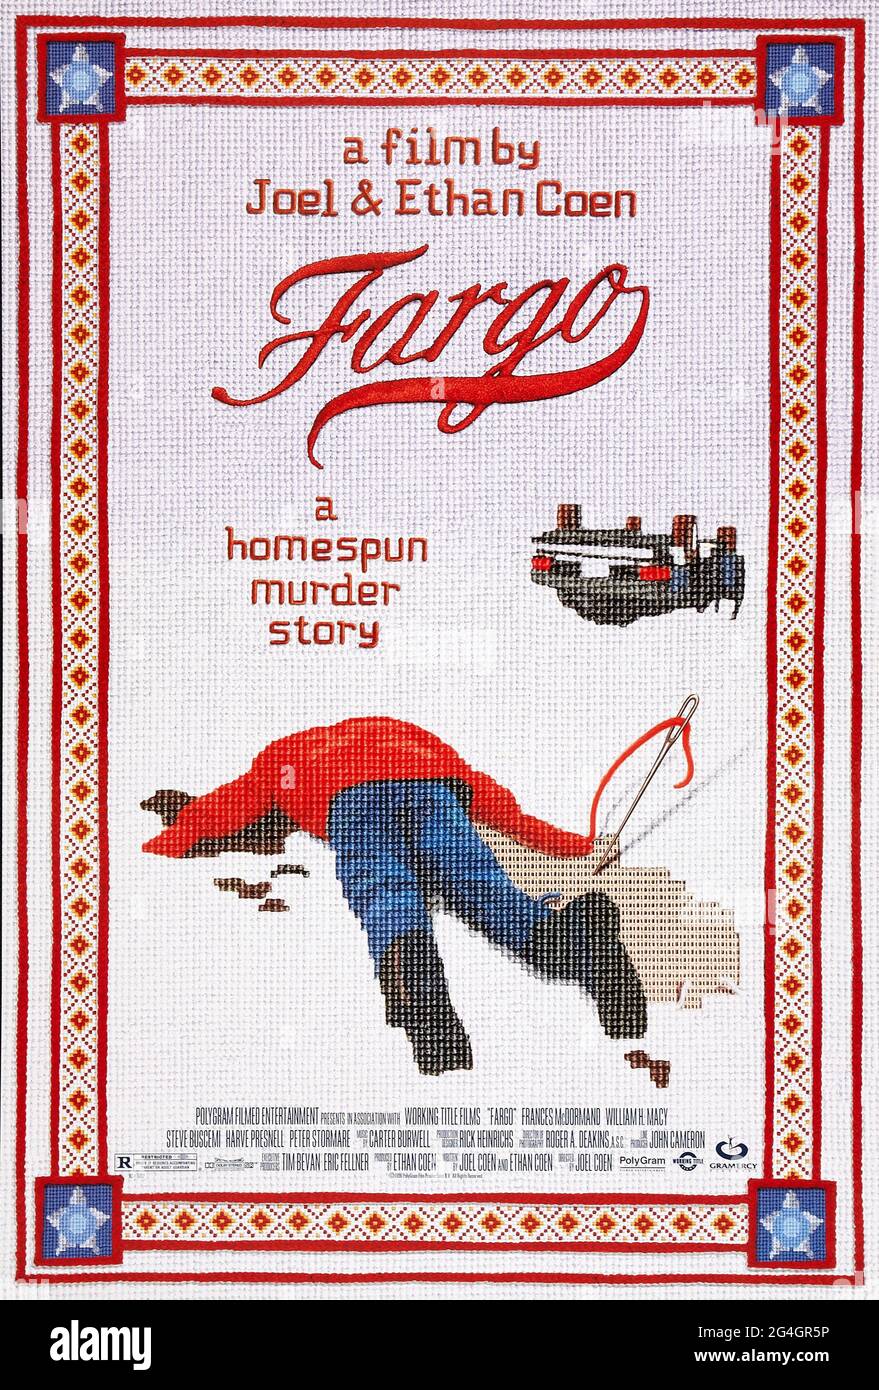 Fargo (1996) directed by Joel Coen and Ethan Coen and starring William H. Macy, Frances McDormand and Steve Buscemi. Coen brothers original black comedy about a bungled crime results in bloody violence and police interest. Stock Photo